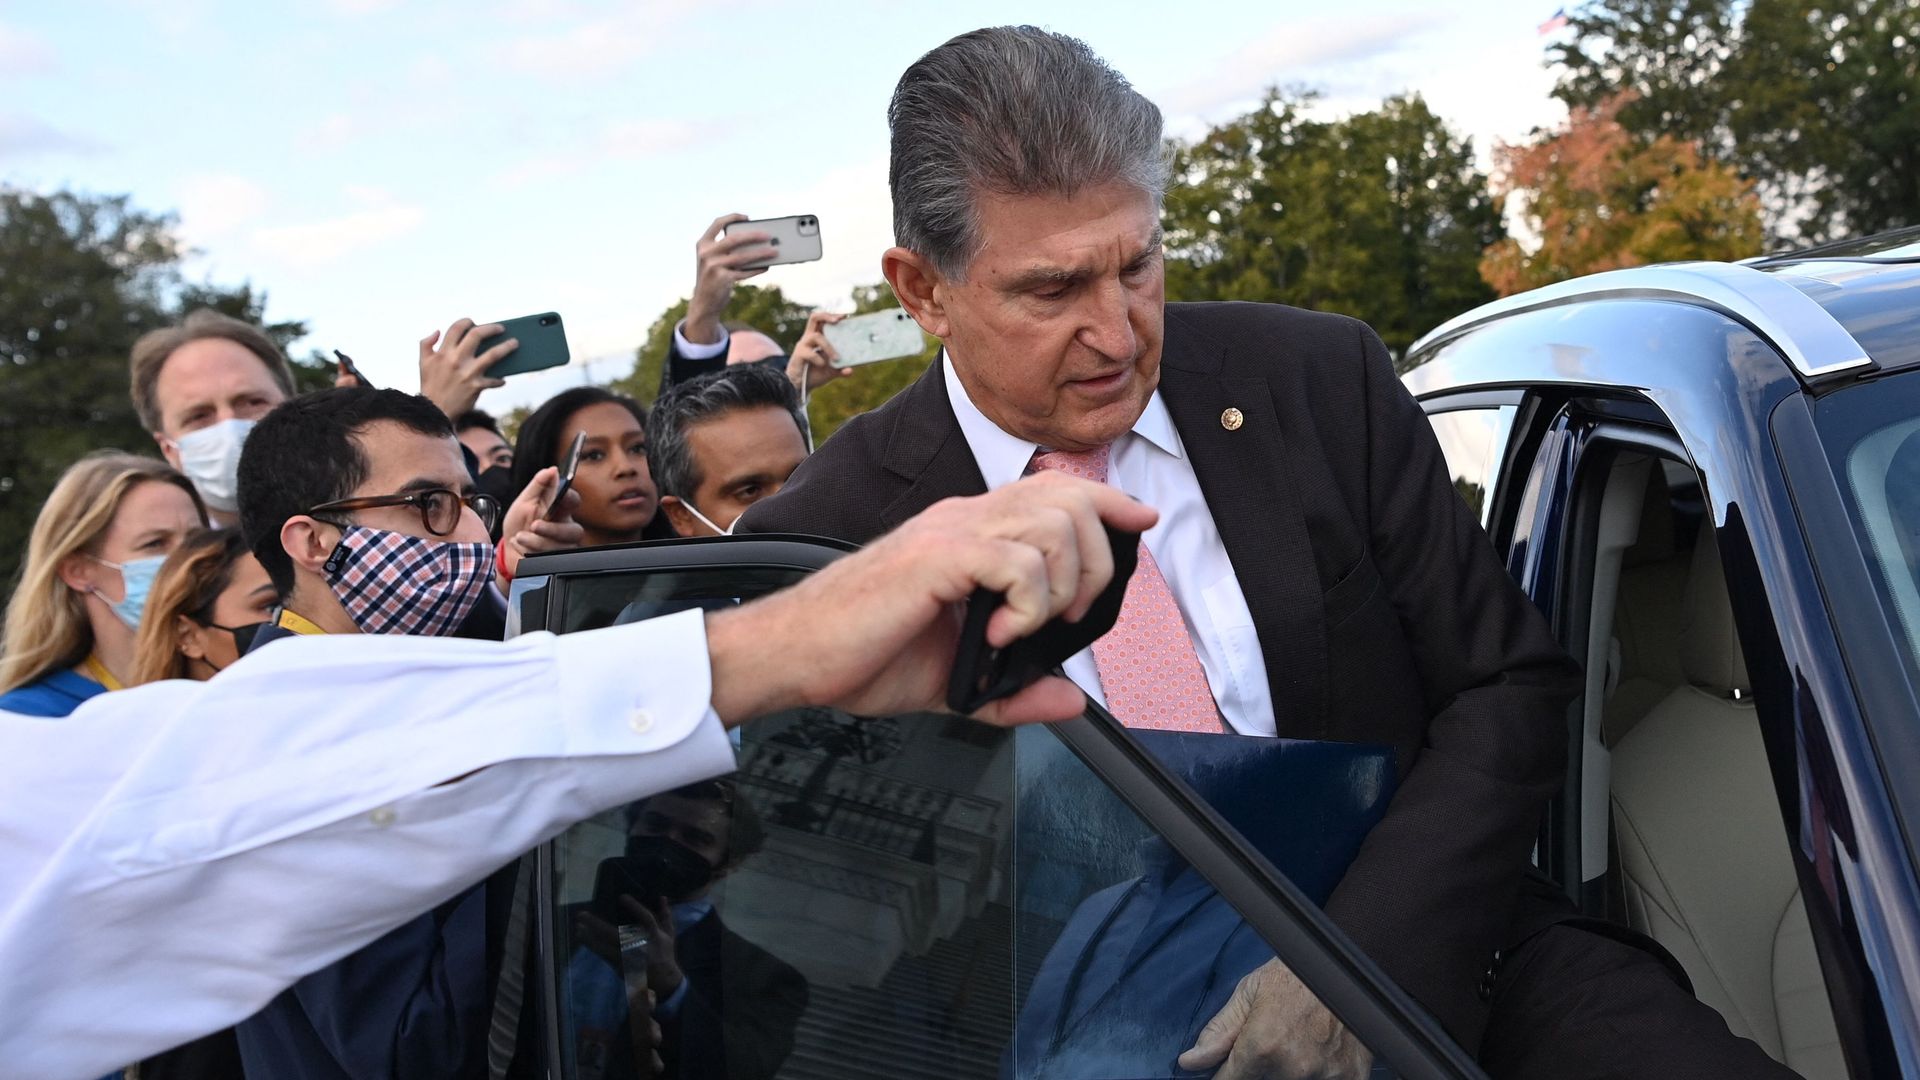 Sen. Joe Manchin is seen surrounded by reporters as he gets in a car on Thursday.